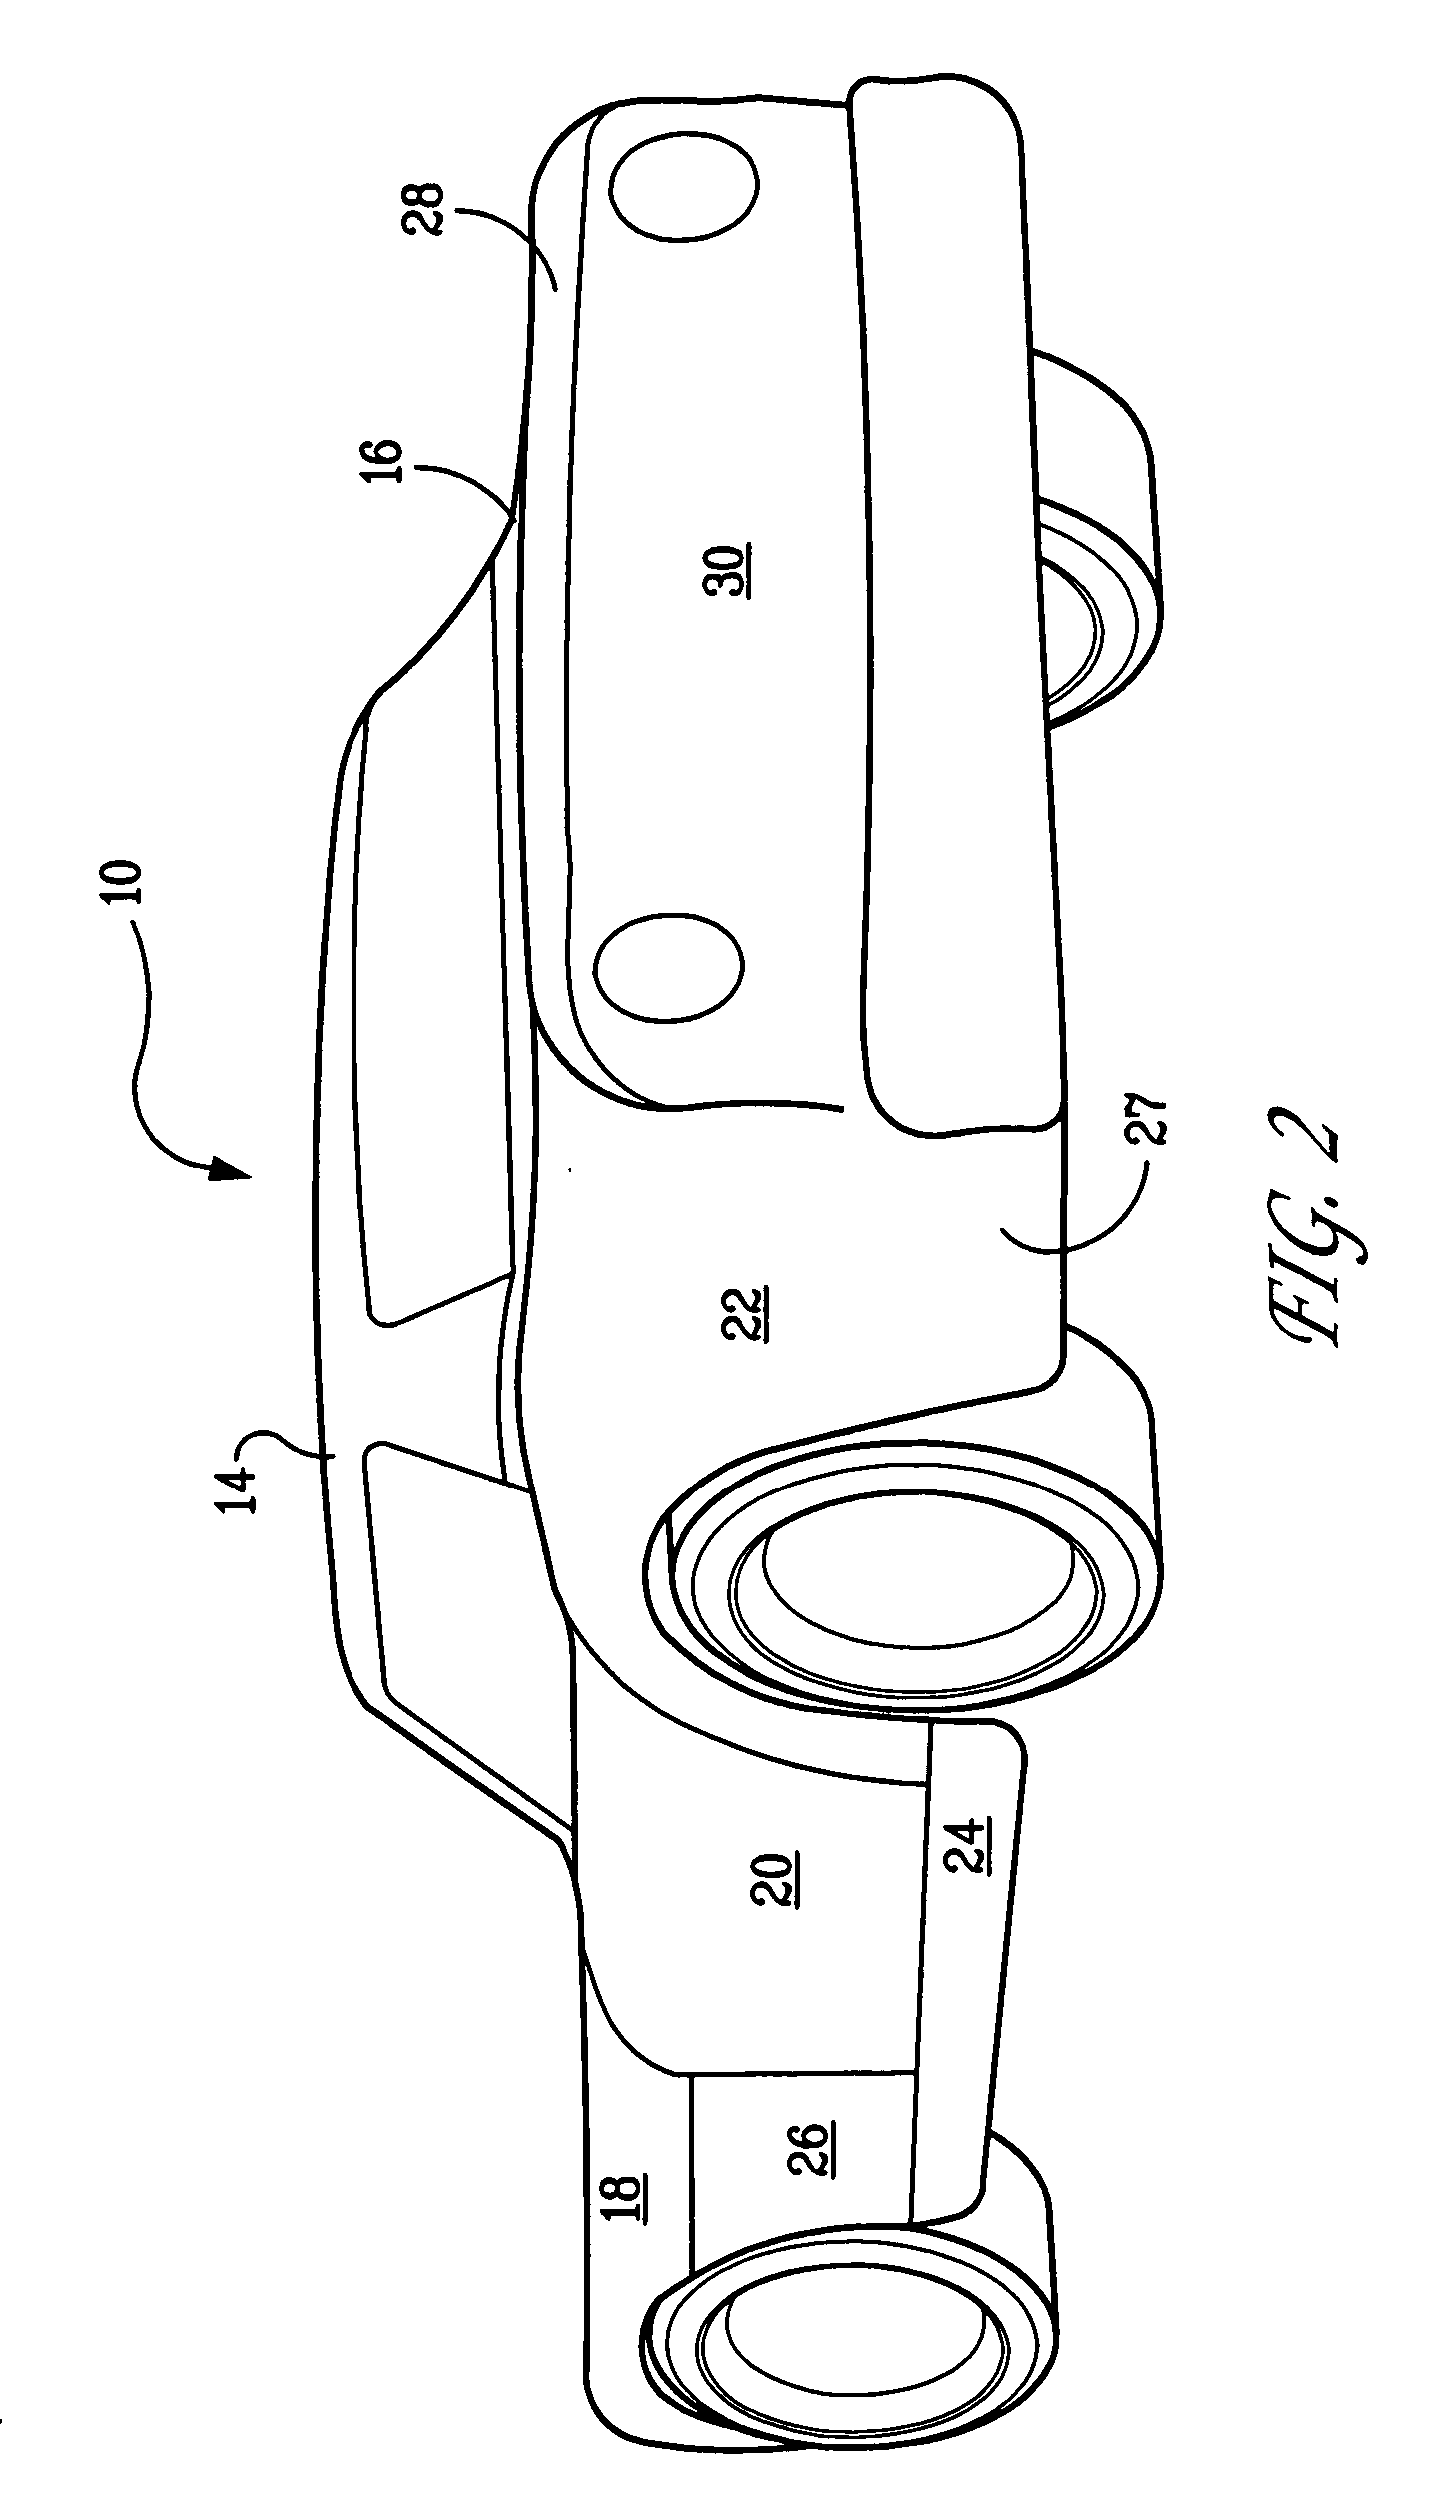 Paint system and method of painting fiber reinforced polypropylene composite components